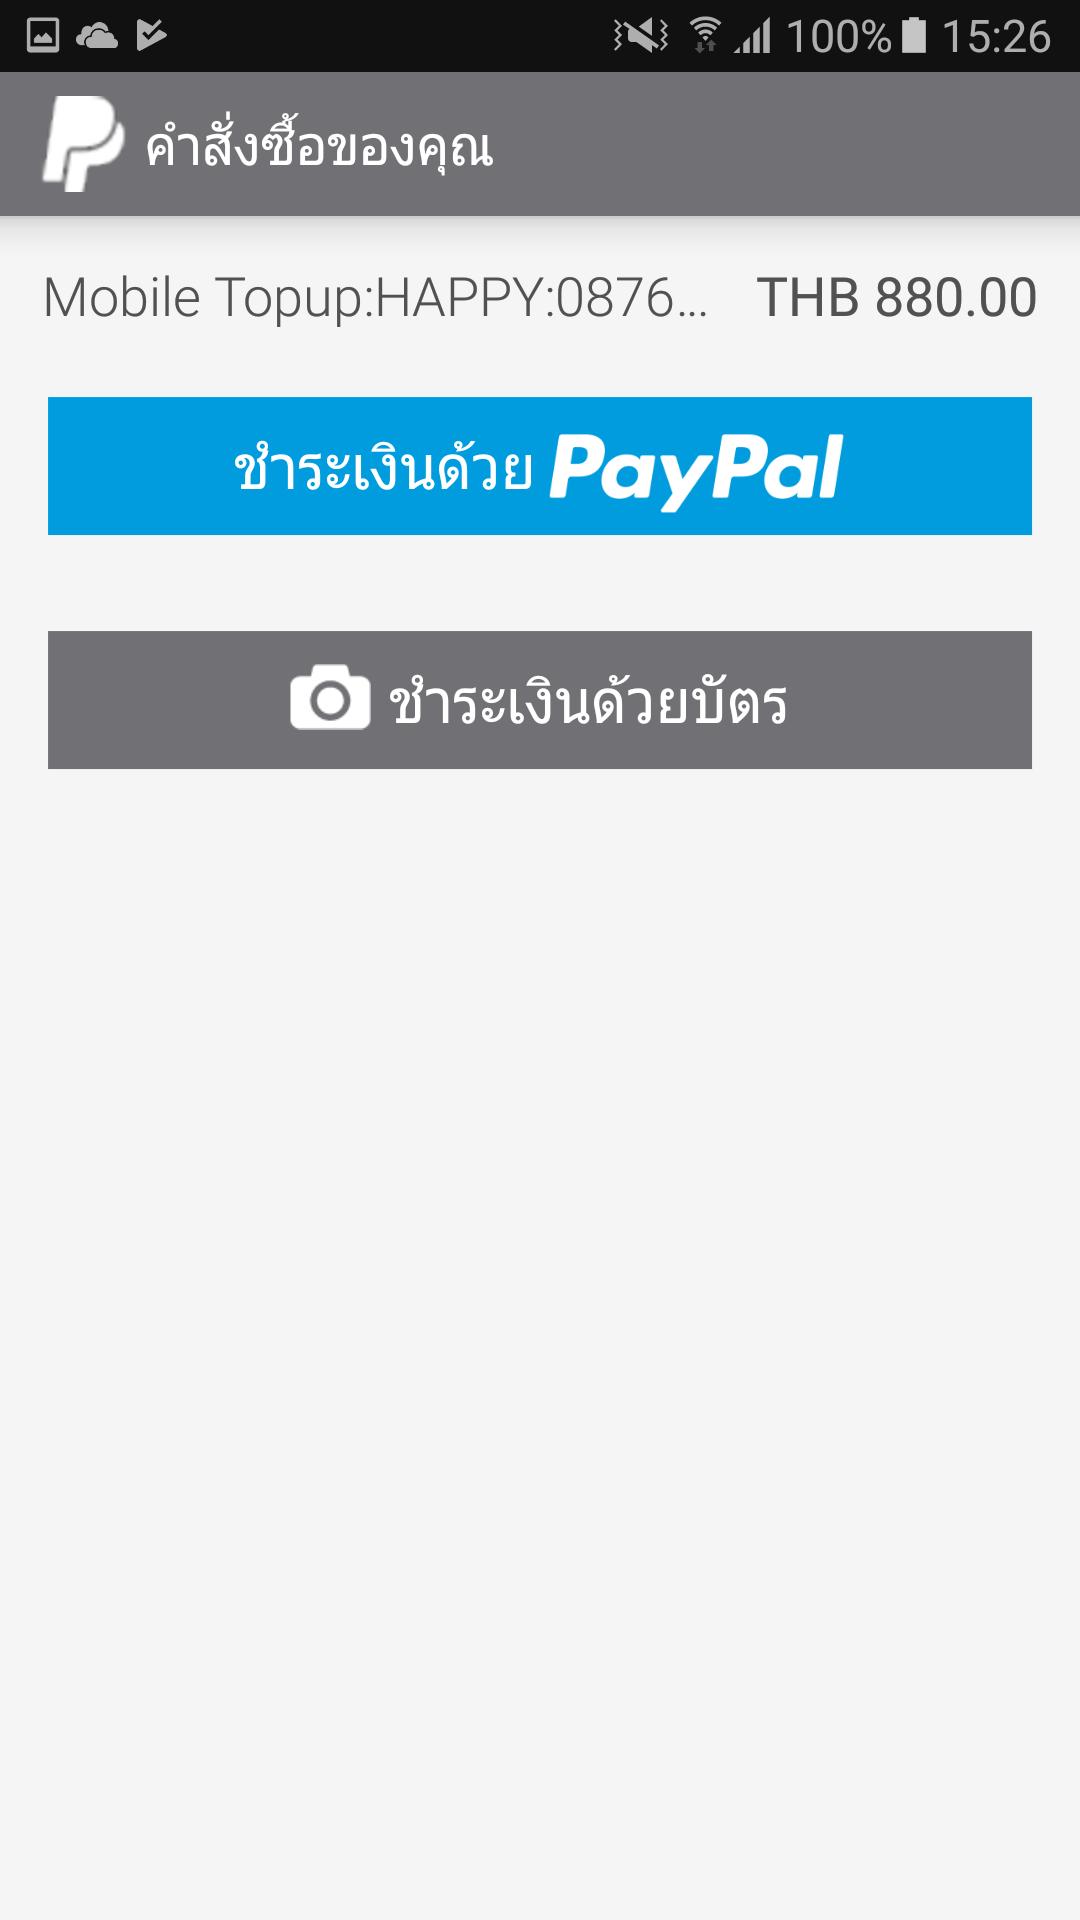 Mobile Top Up Thailand for Android - APK Download